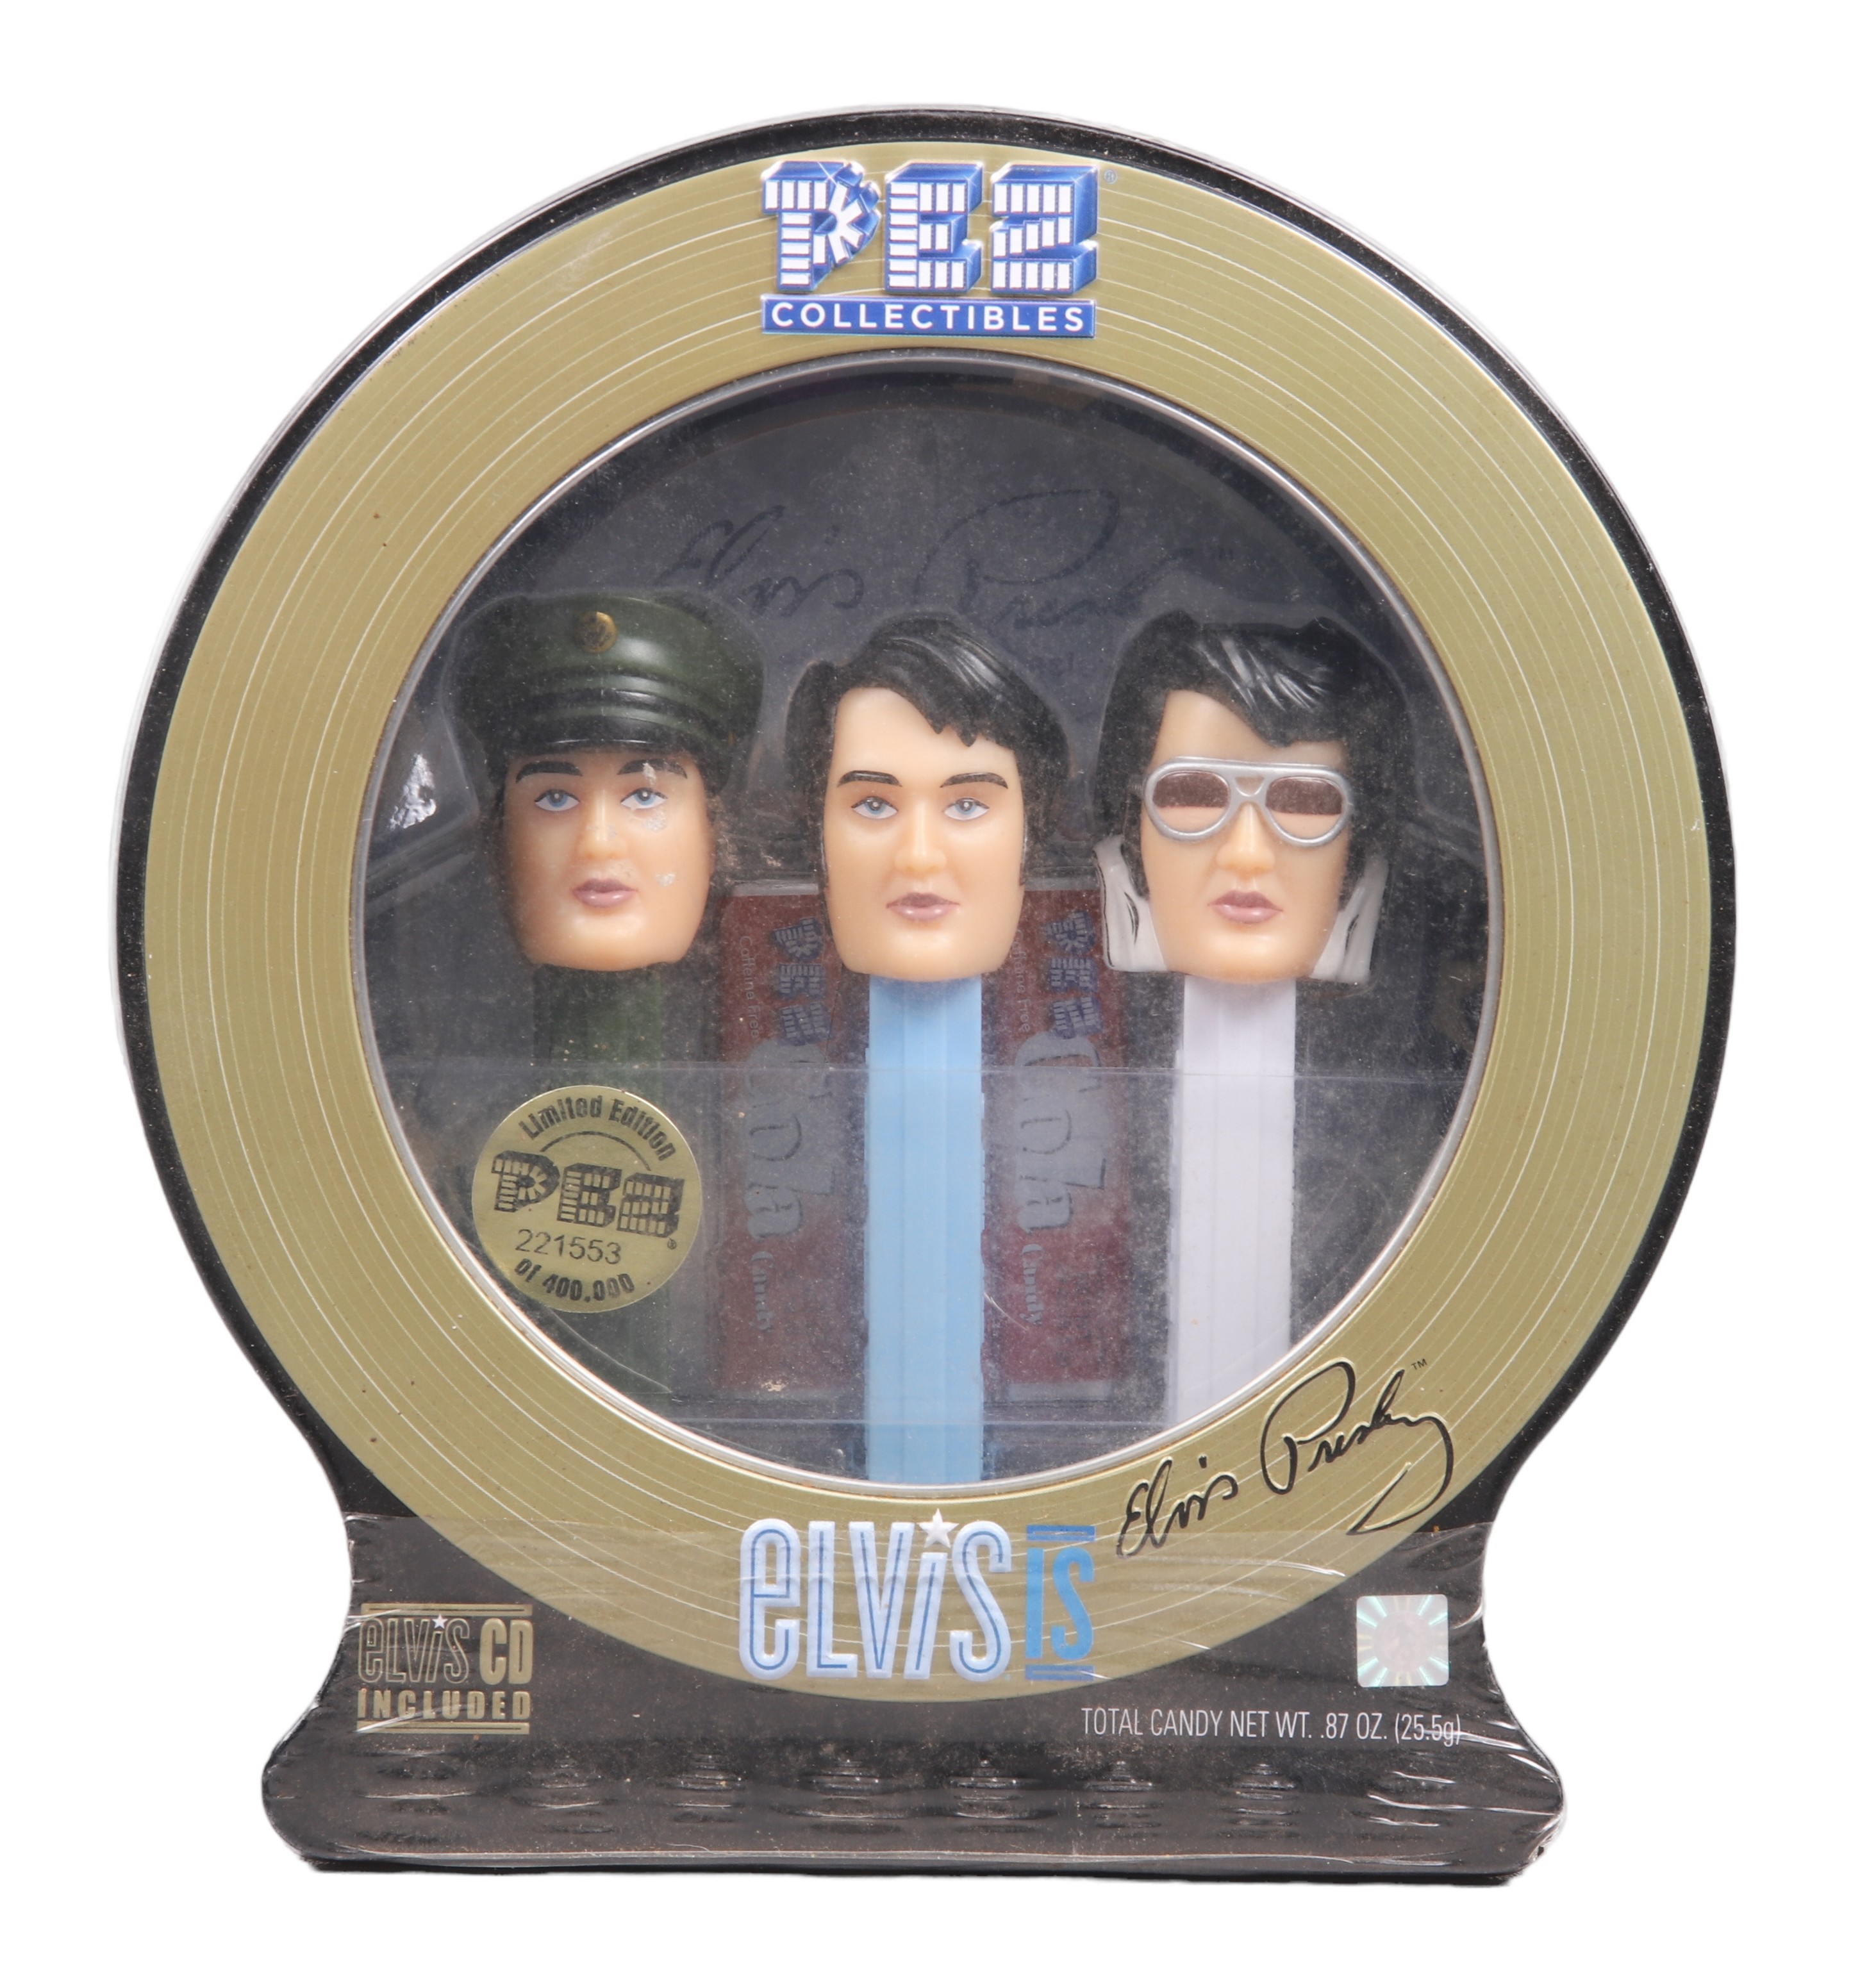 Elvis pez collection, with CD in